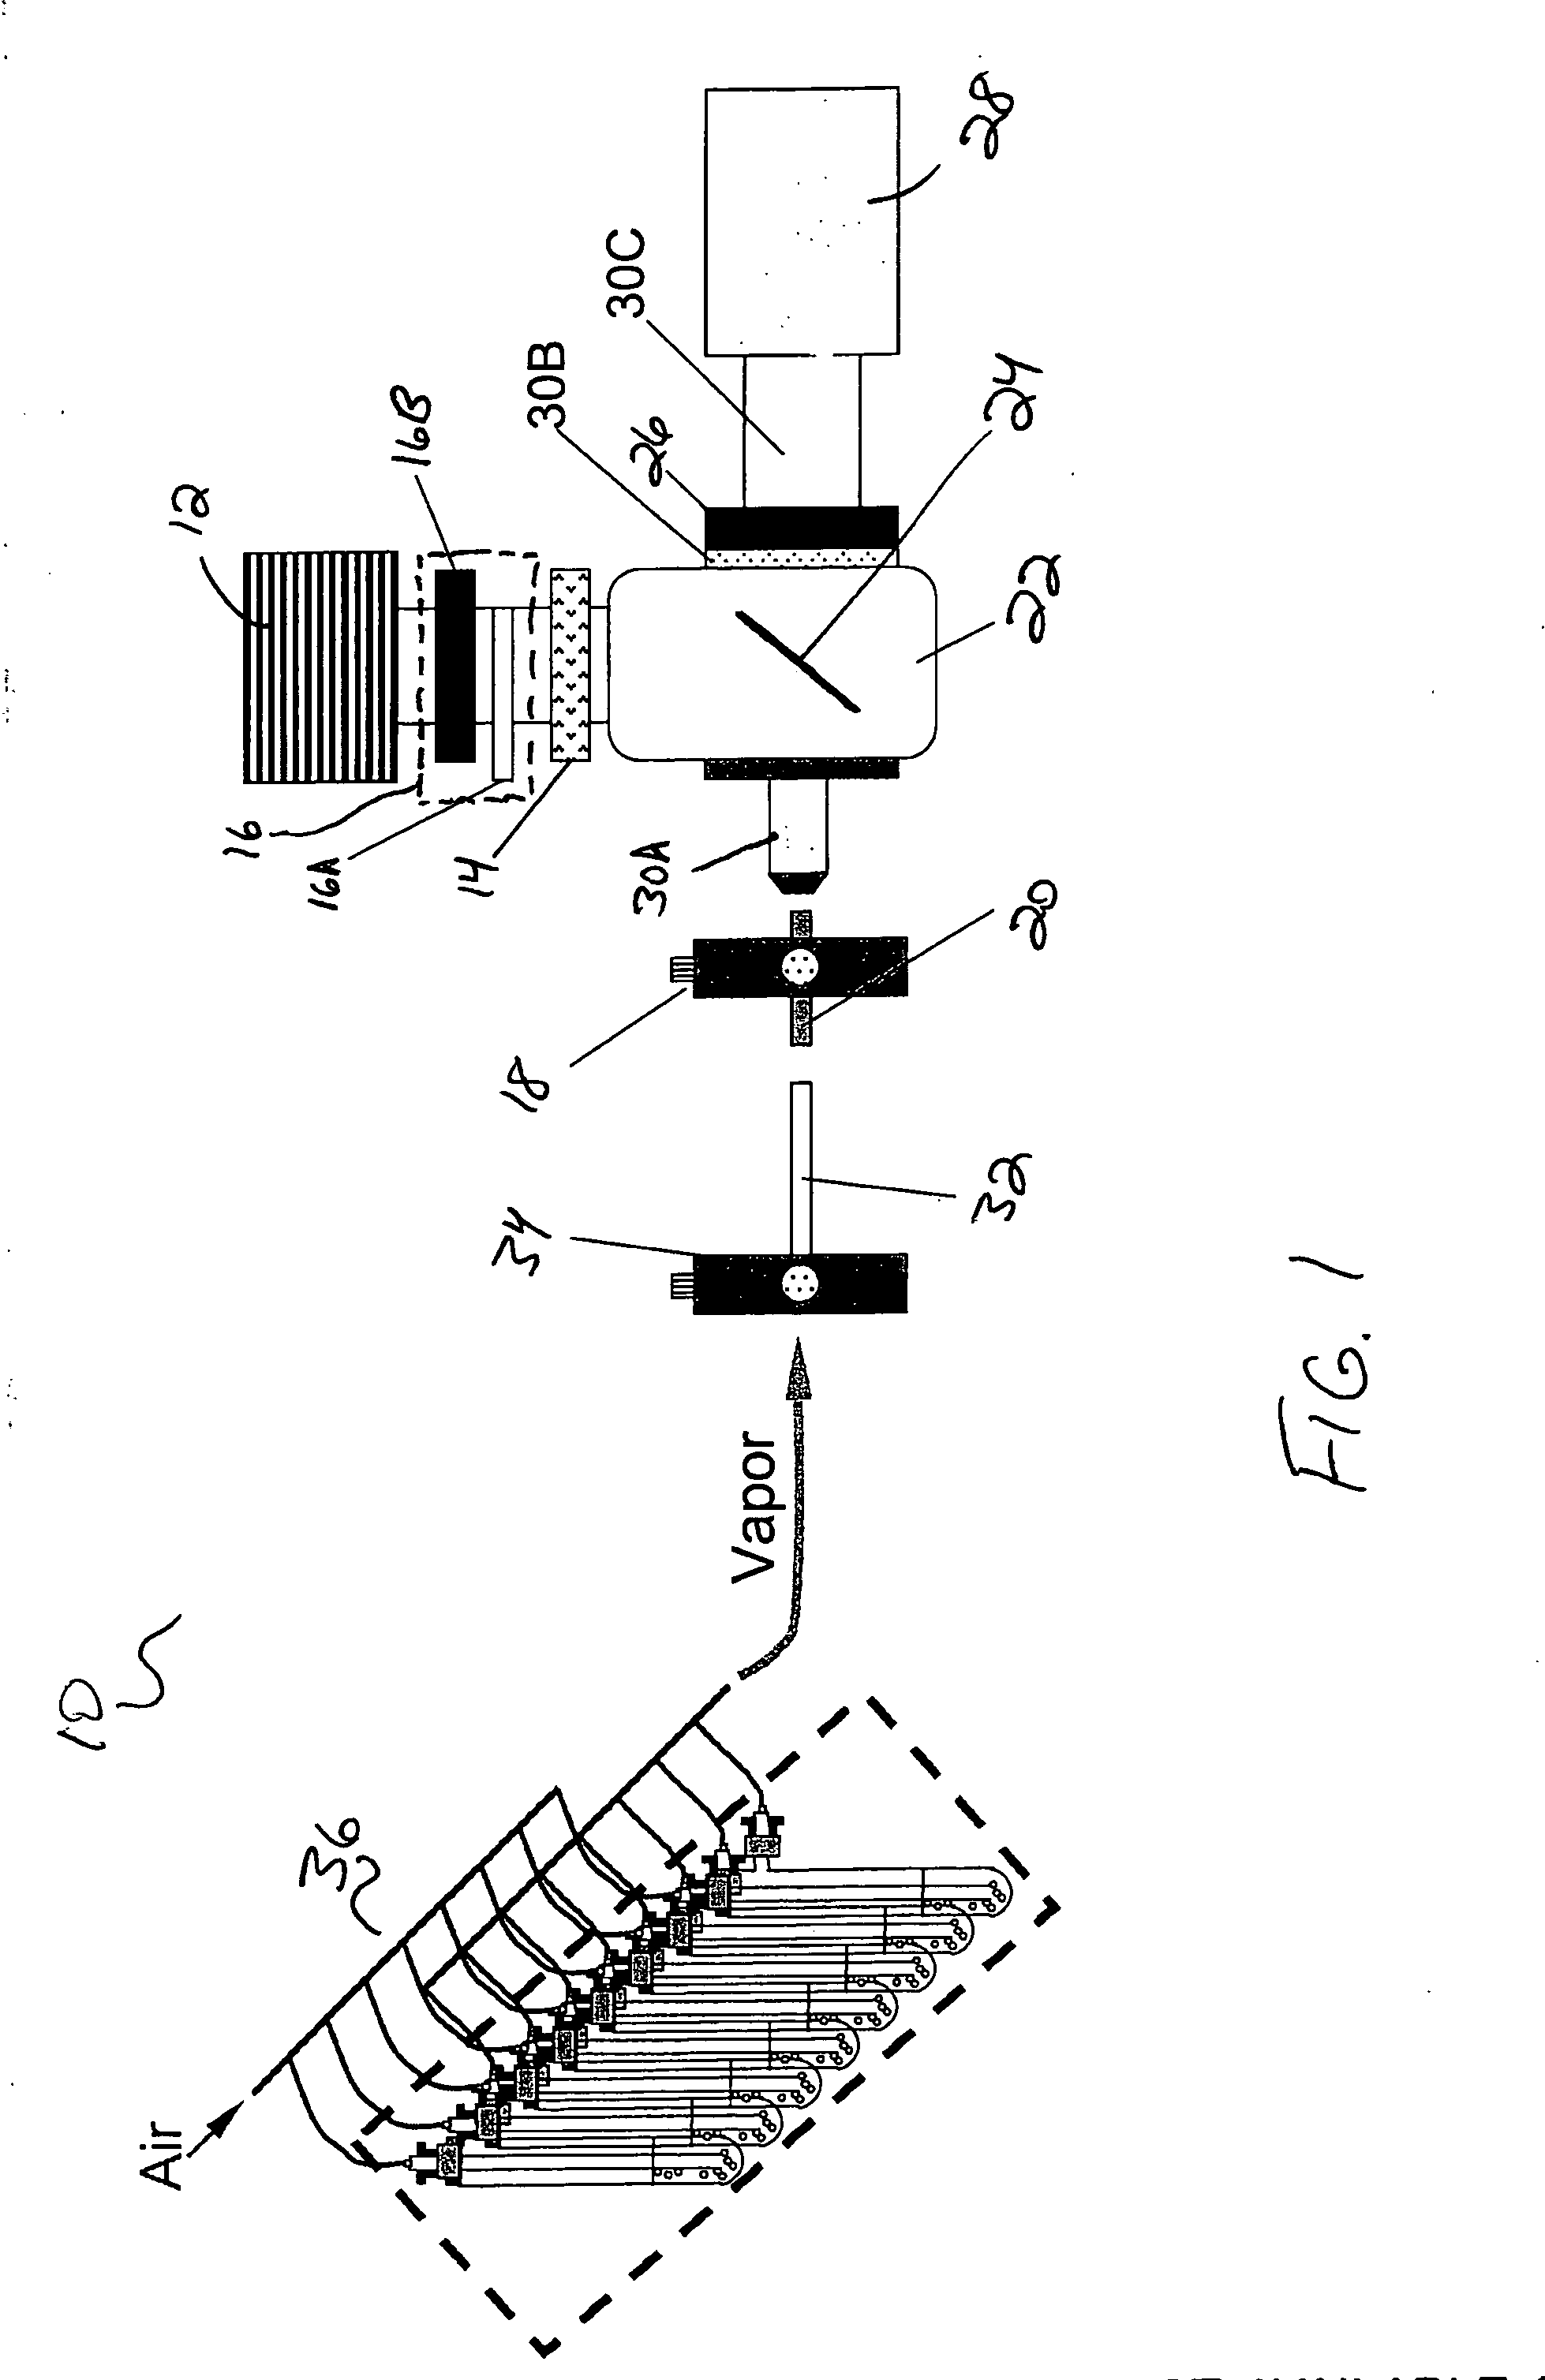 Method and system of array imaging